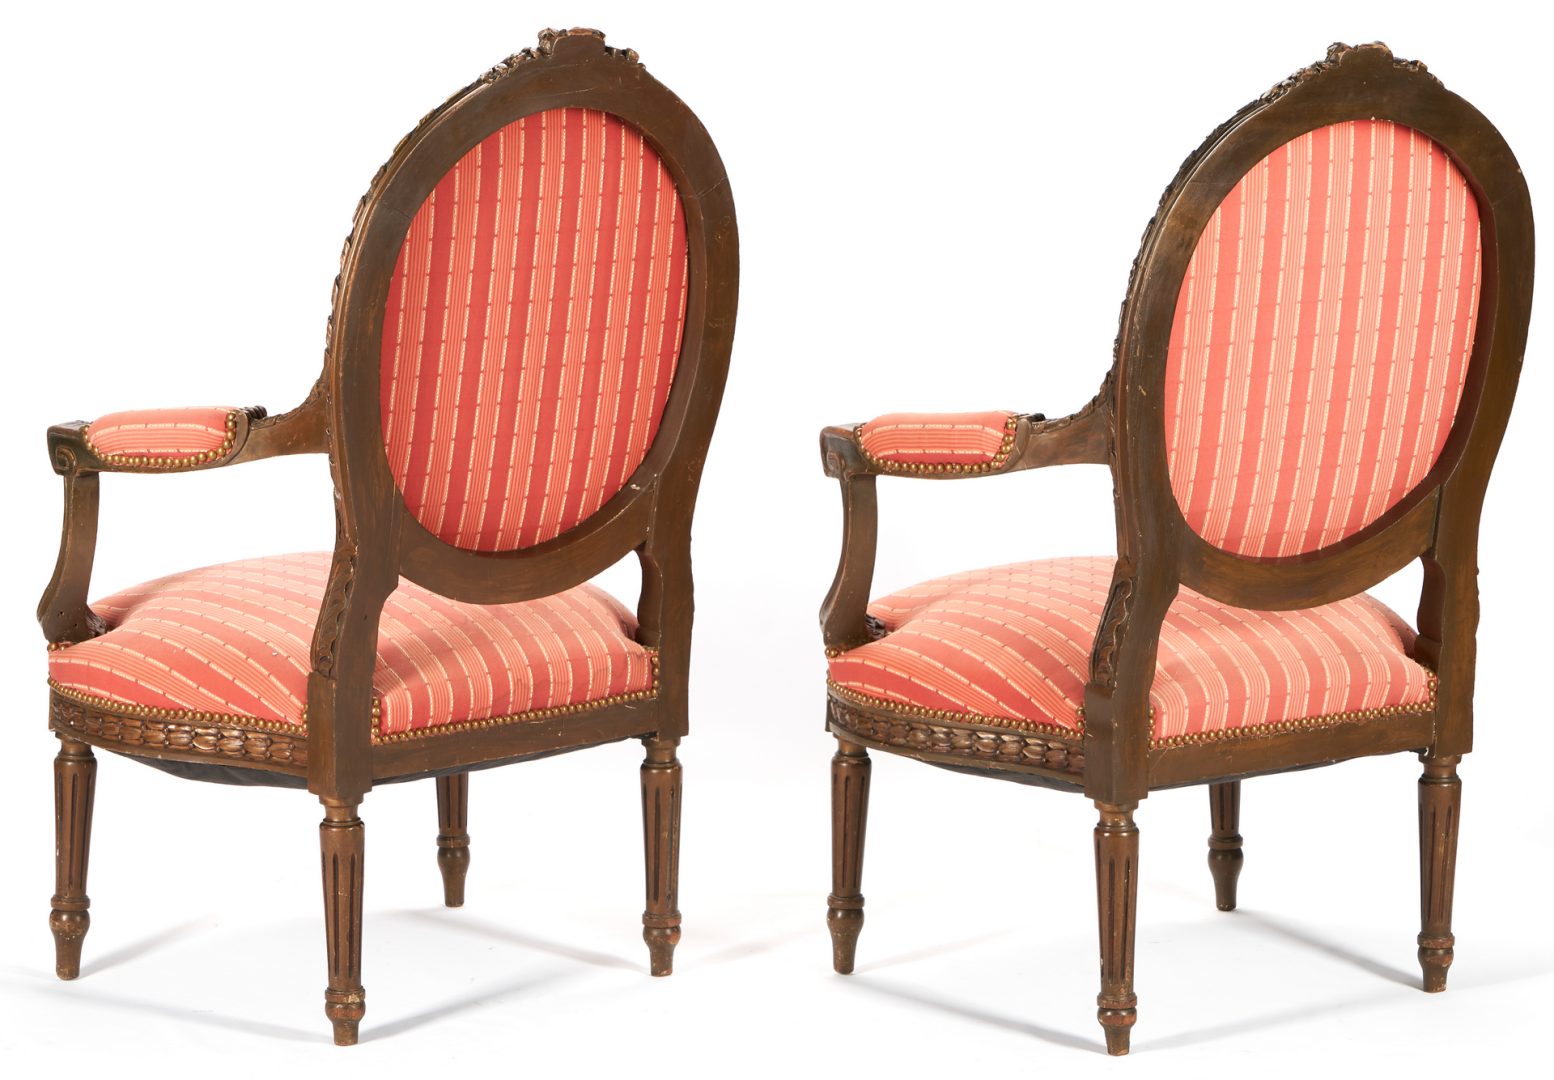 Lot 395: Pair of Louis XVI Style Carved Fauteuils Or Armchairs